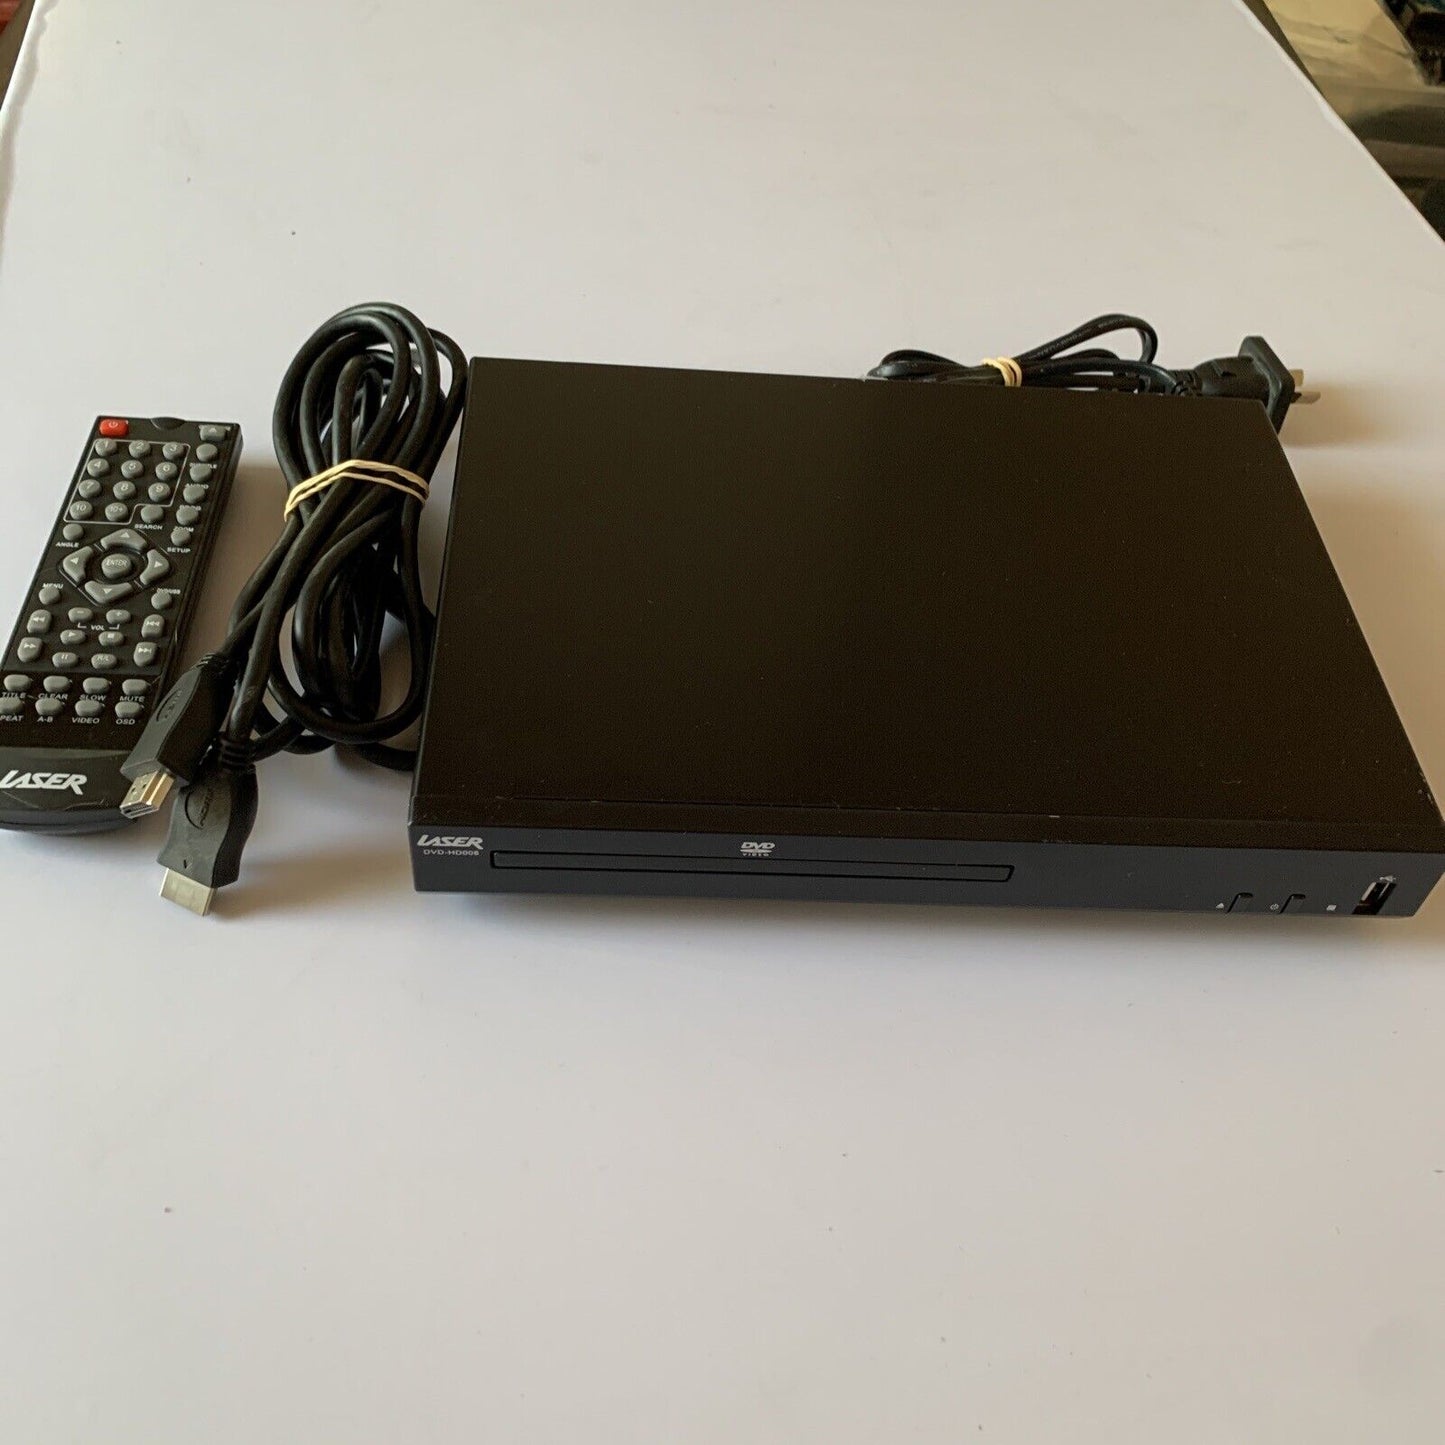 Laser Multi All Region DVD Player DVD-HD008 with HDMI RCA and Remote 110-240V